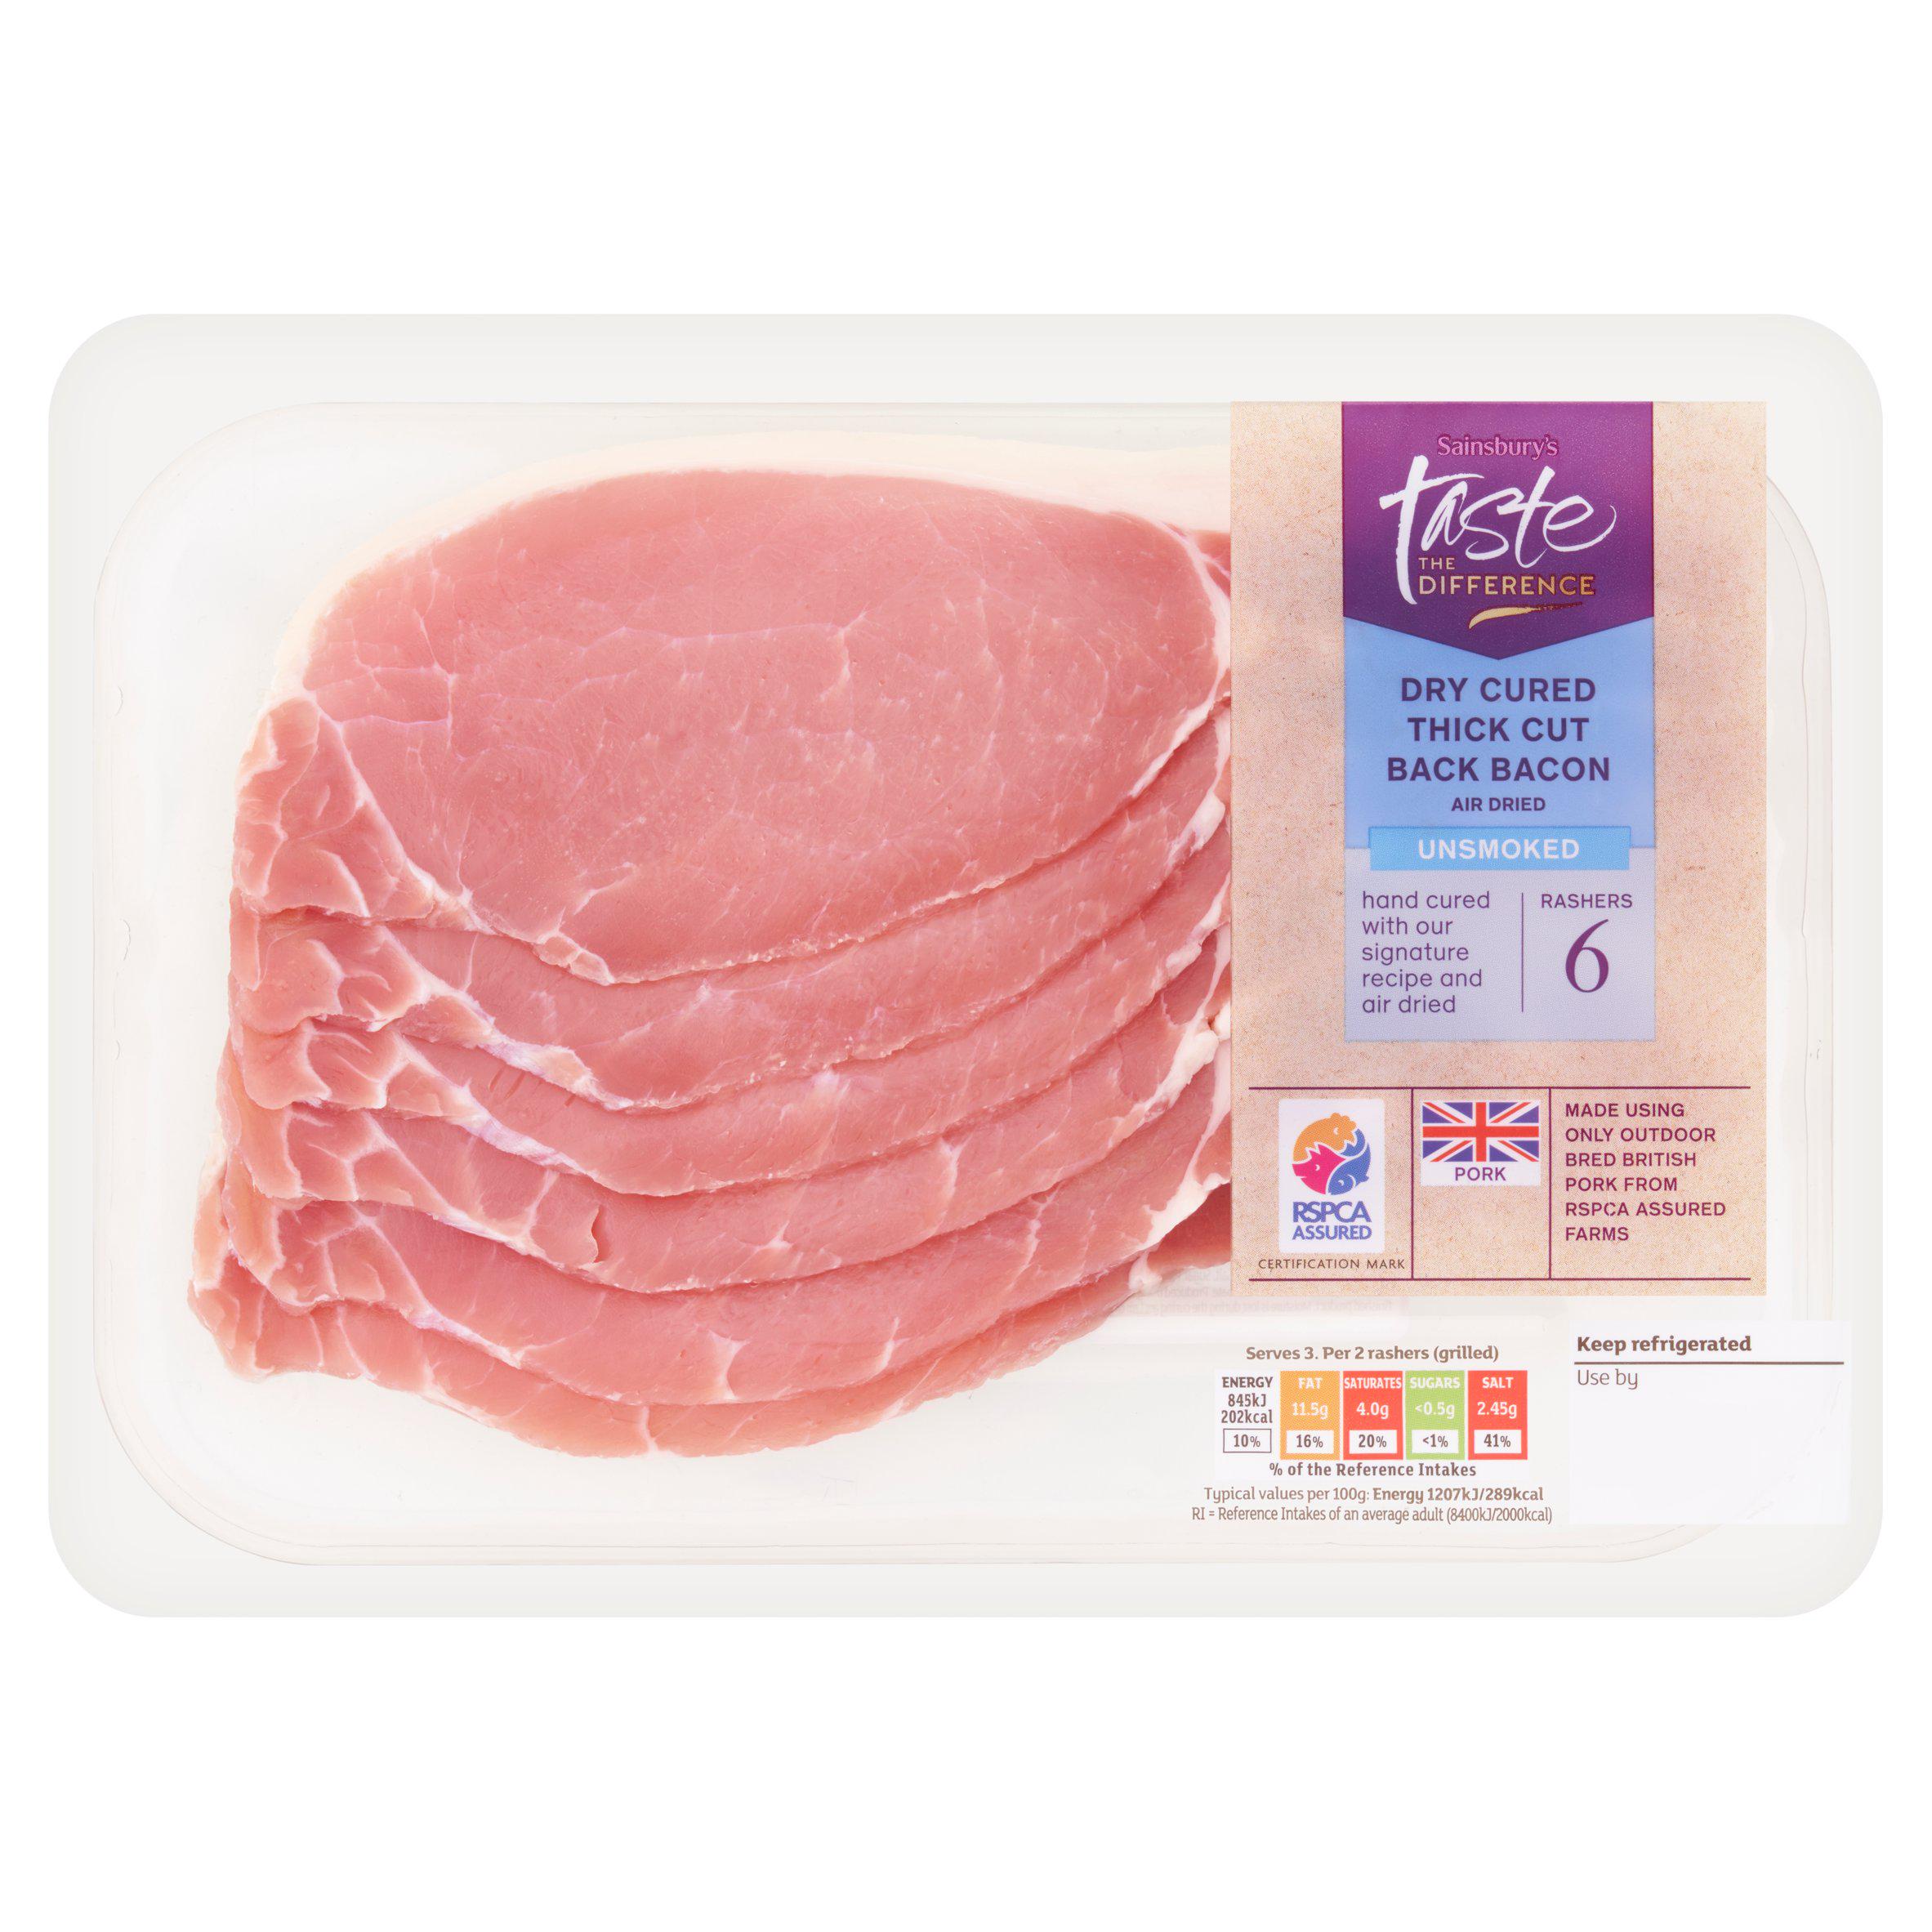 Sainsbury's Unsmoked Air Dried Thick Cut Back Bacon Rashers, Taste the Difference x6 300g